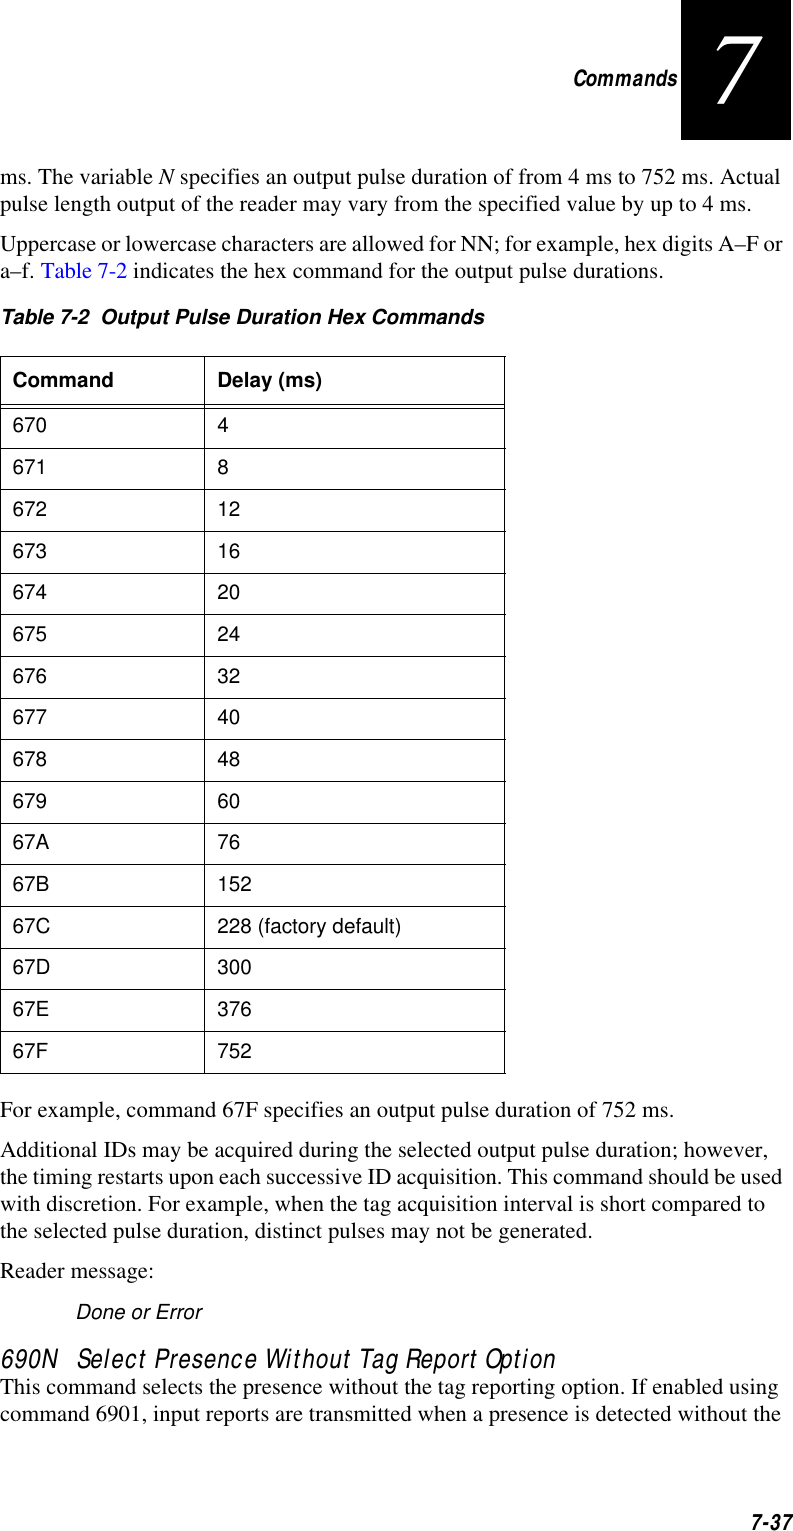 Commands7-377ms. The variable N specifies an output pulse duration of from 4 ms to 752 ms. Actual pulse length output of the reader may vary from the specified value by up to 4 ms.Uppercase or lowercase characters are allowed for NN; for example, hex digits A–F or a–f. Table 7-2 indicates the hex command for the output pulse durations. For example, command 67F specifies an output pulse duration of 752 ms.Additional IDs may be acquired during the selected output pulse duration; however, the timing restarts upon each successive ID acquisition. This command should be used with discretion. For example, when the tag acquisition interval is short compared to the selected pulse duration, distinct pulses may not be generated.Reader message:Done or Error690N   Select Presence Without Tag Report OptionThis command selects the presence without the tag reporting option. If enabled using command 6901, input reports are transmitted when a presence is detected without the Table 7-2  Output Pulse Duration Hex CommandsCommand Delay (ms)670 4 671 8672 12673 16674 20675 24676 32677 40678 48679 6067A 7667B 15267C 228 (factory default)67D 30067E 37667F 752